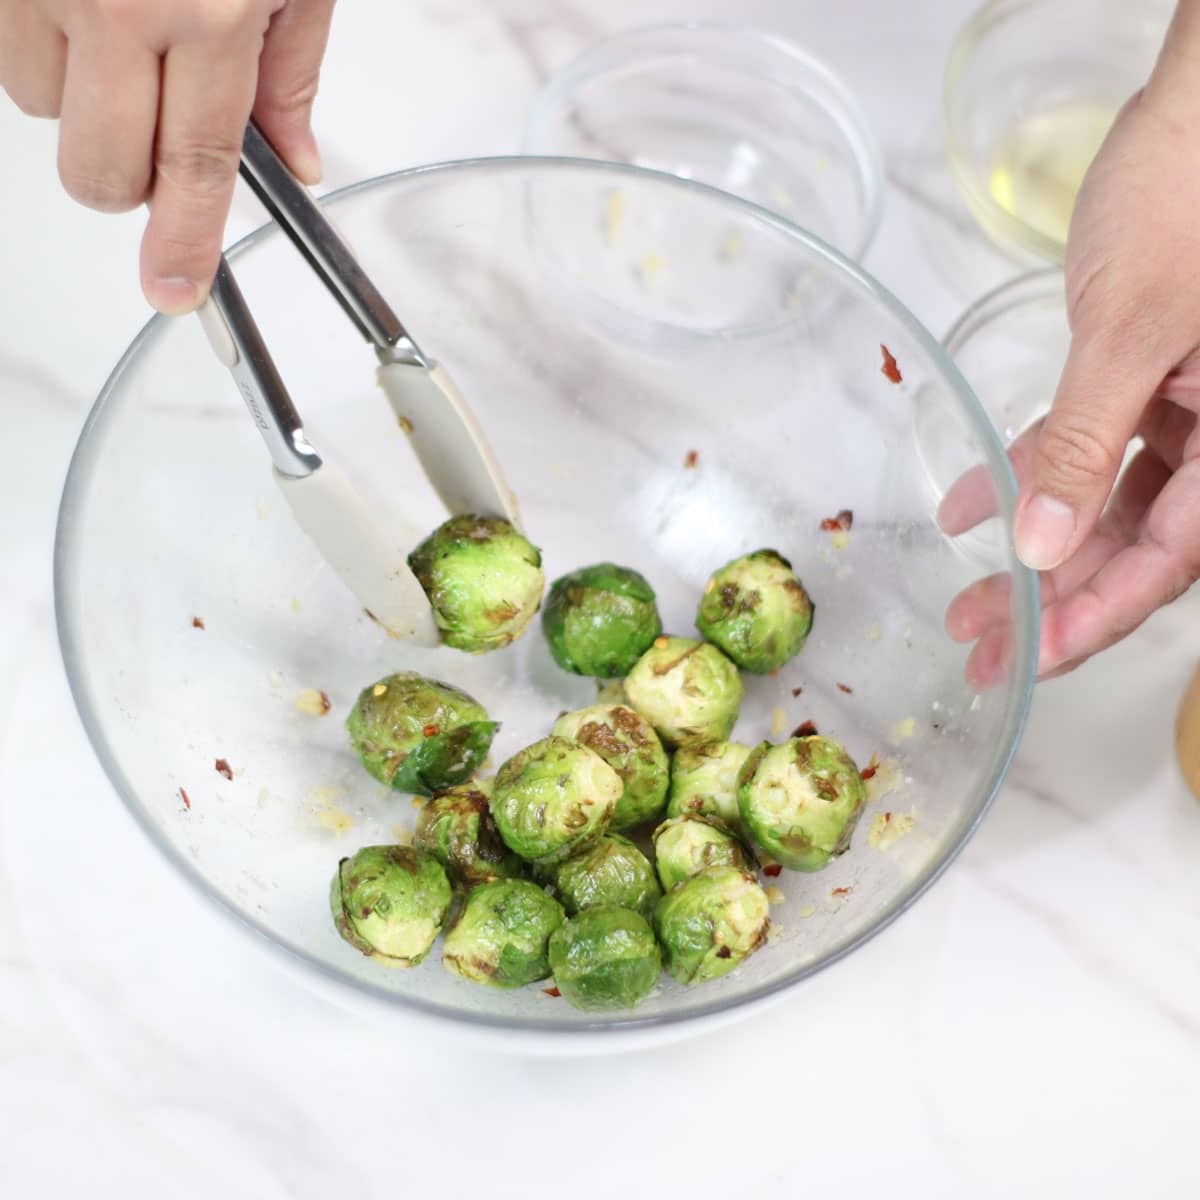 Seasoning whole Brussels sprouts